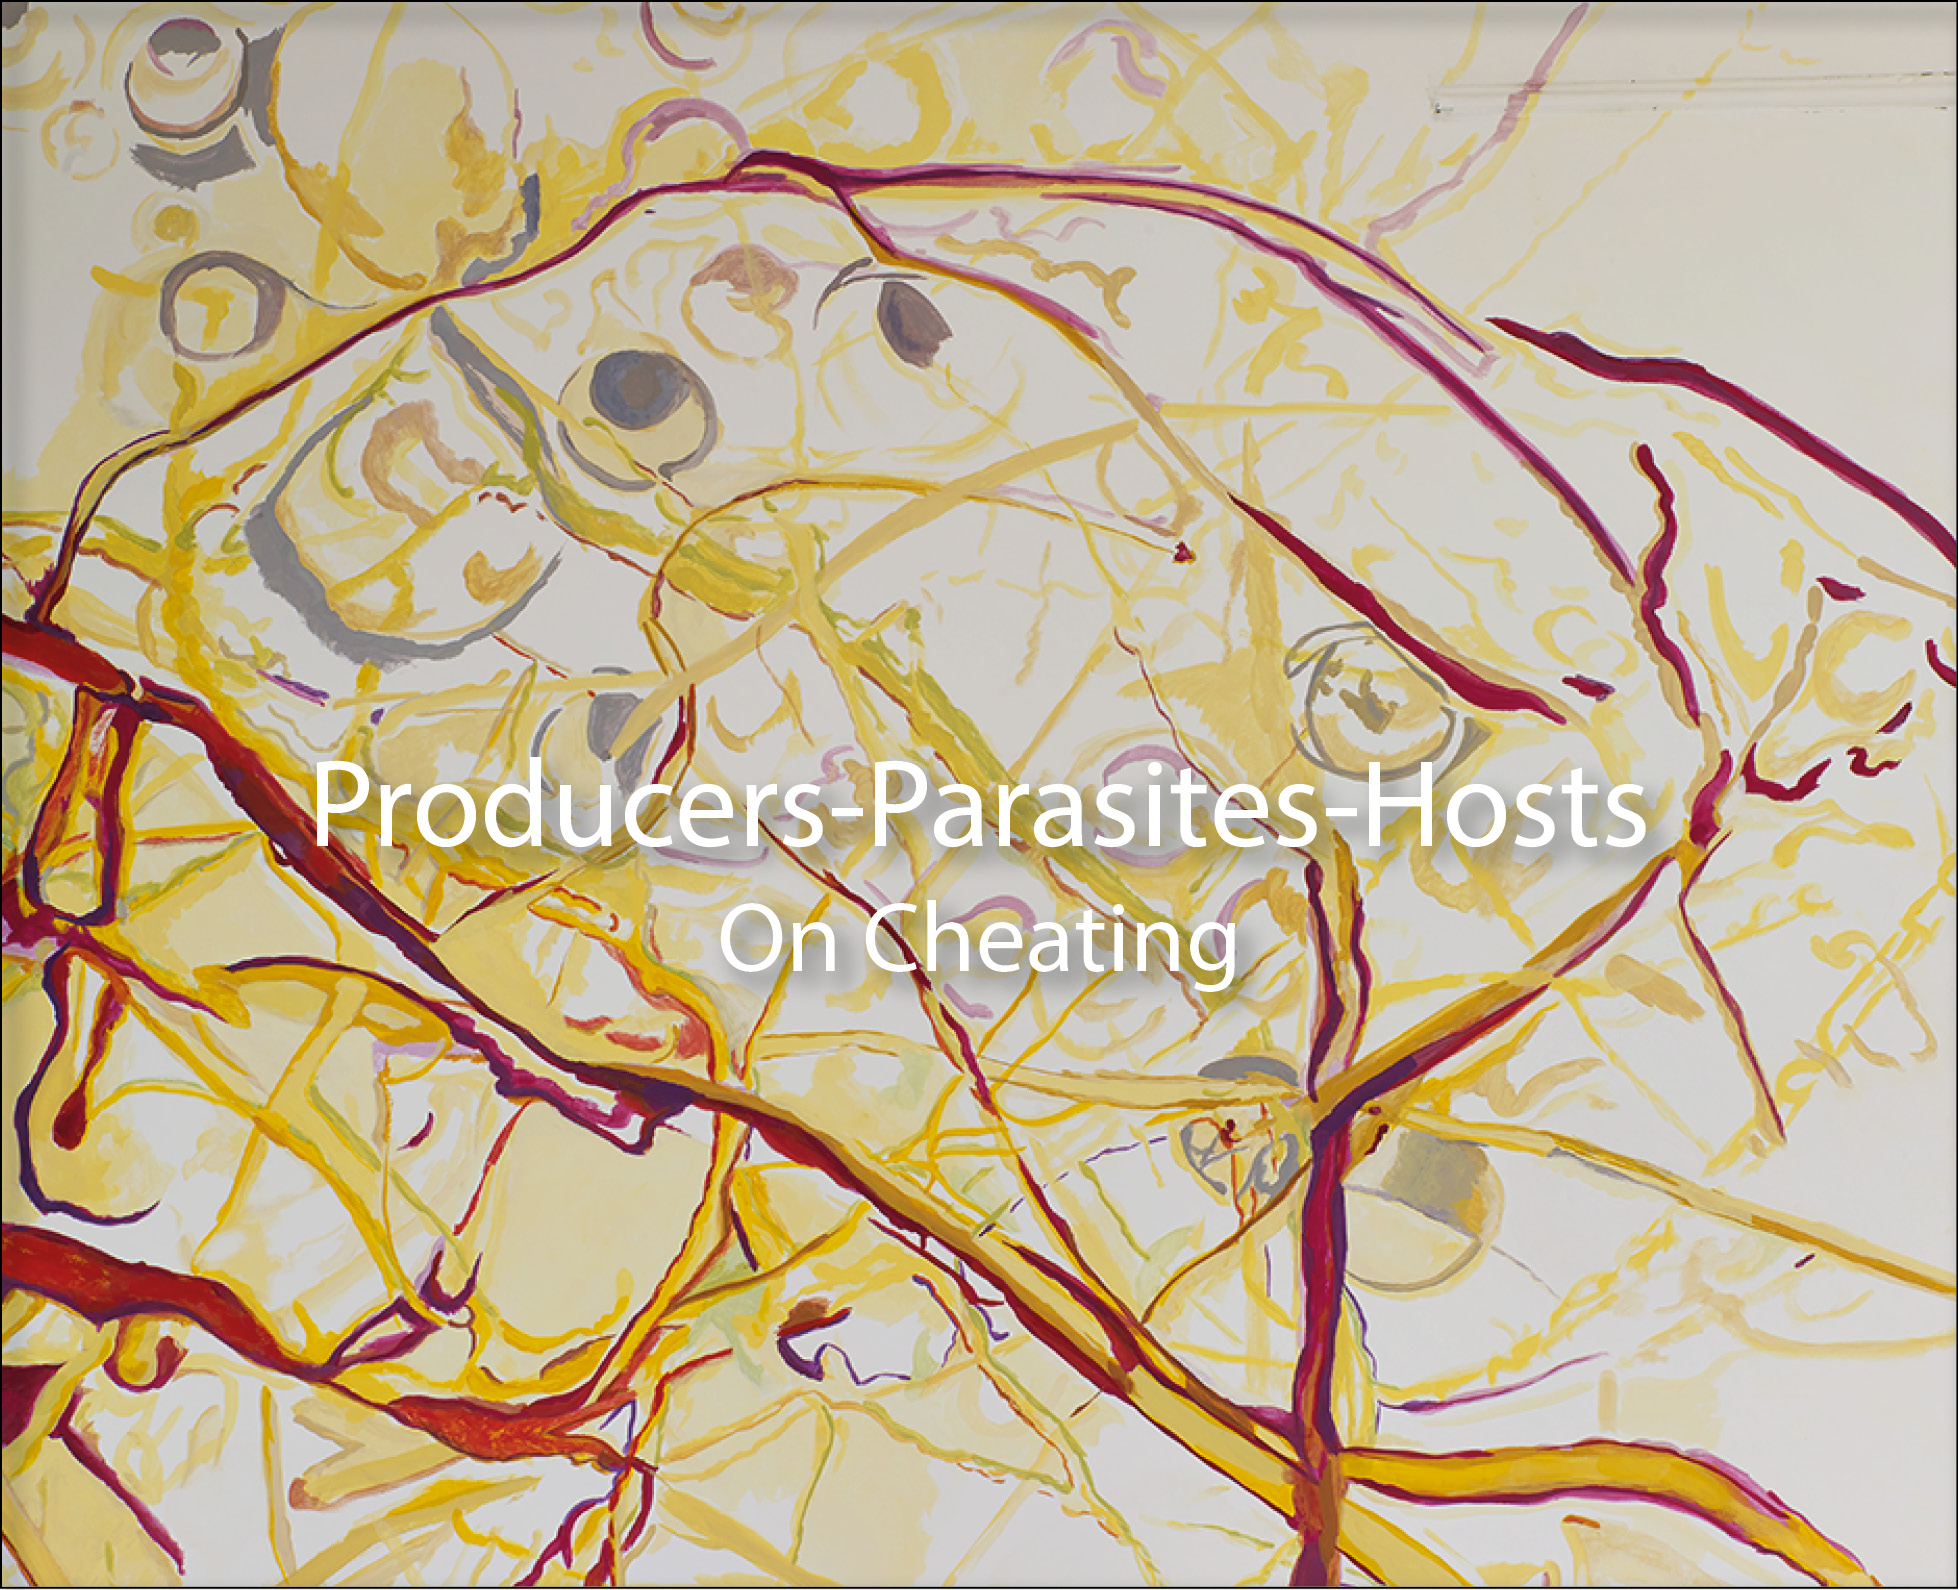 PRODUCERS-PARASITES-HOSTS (ON CHEATING)